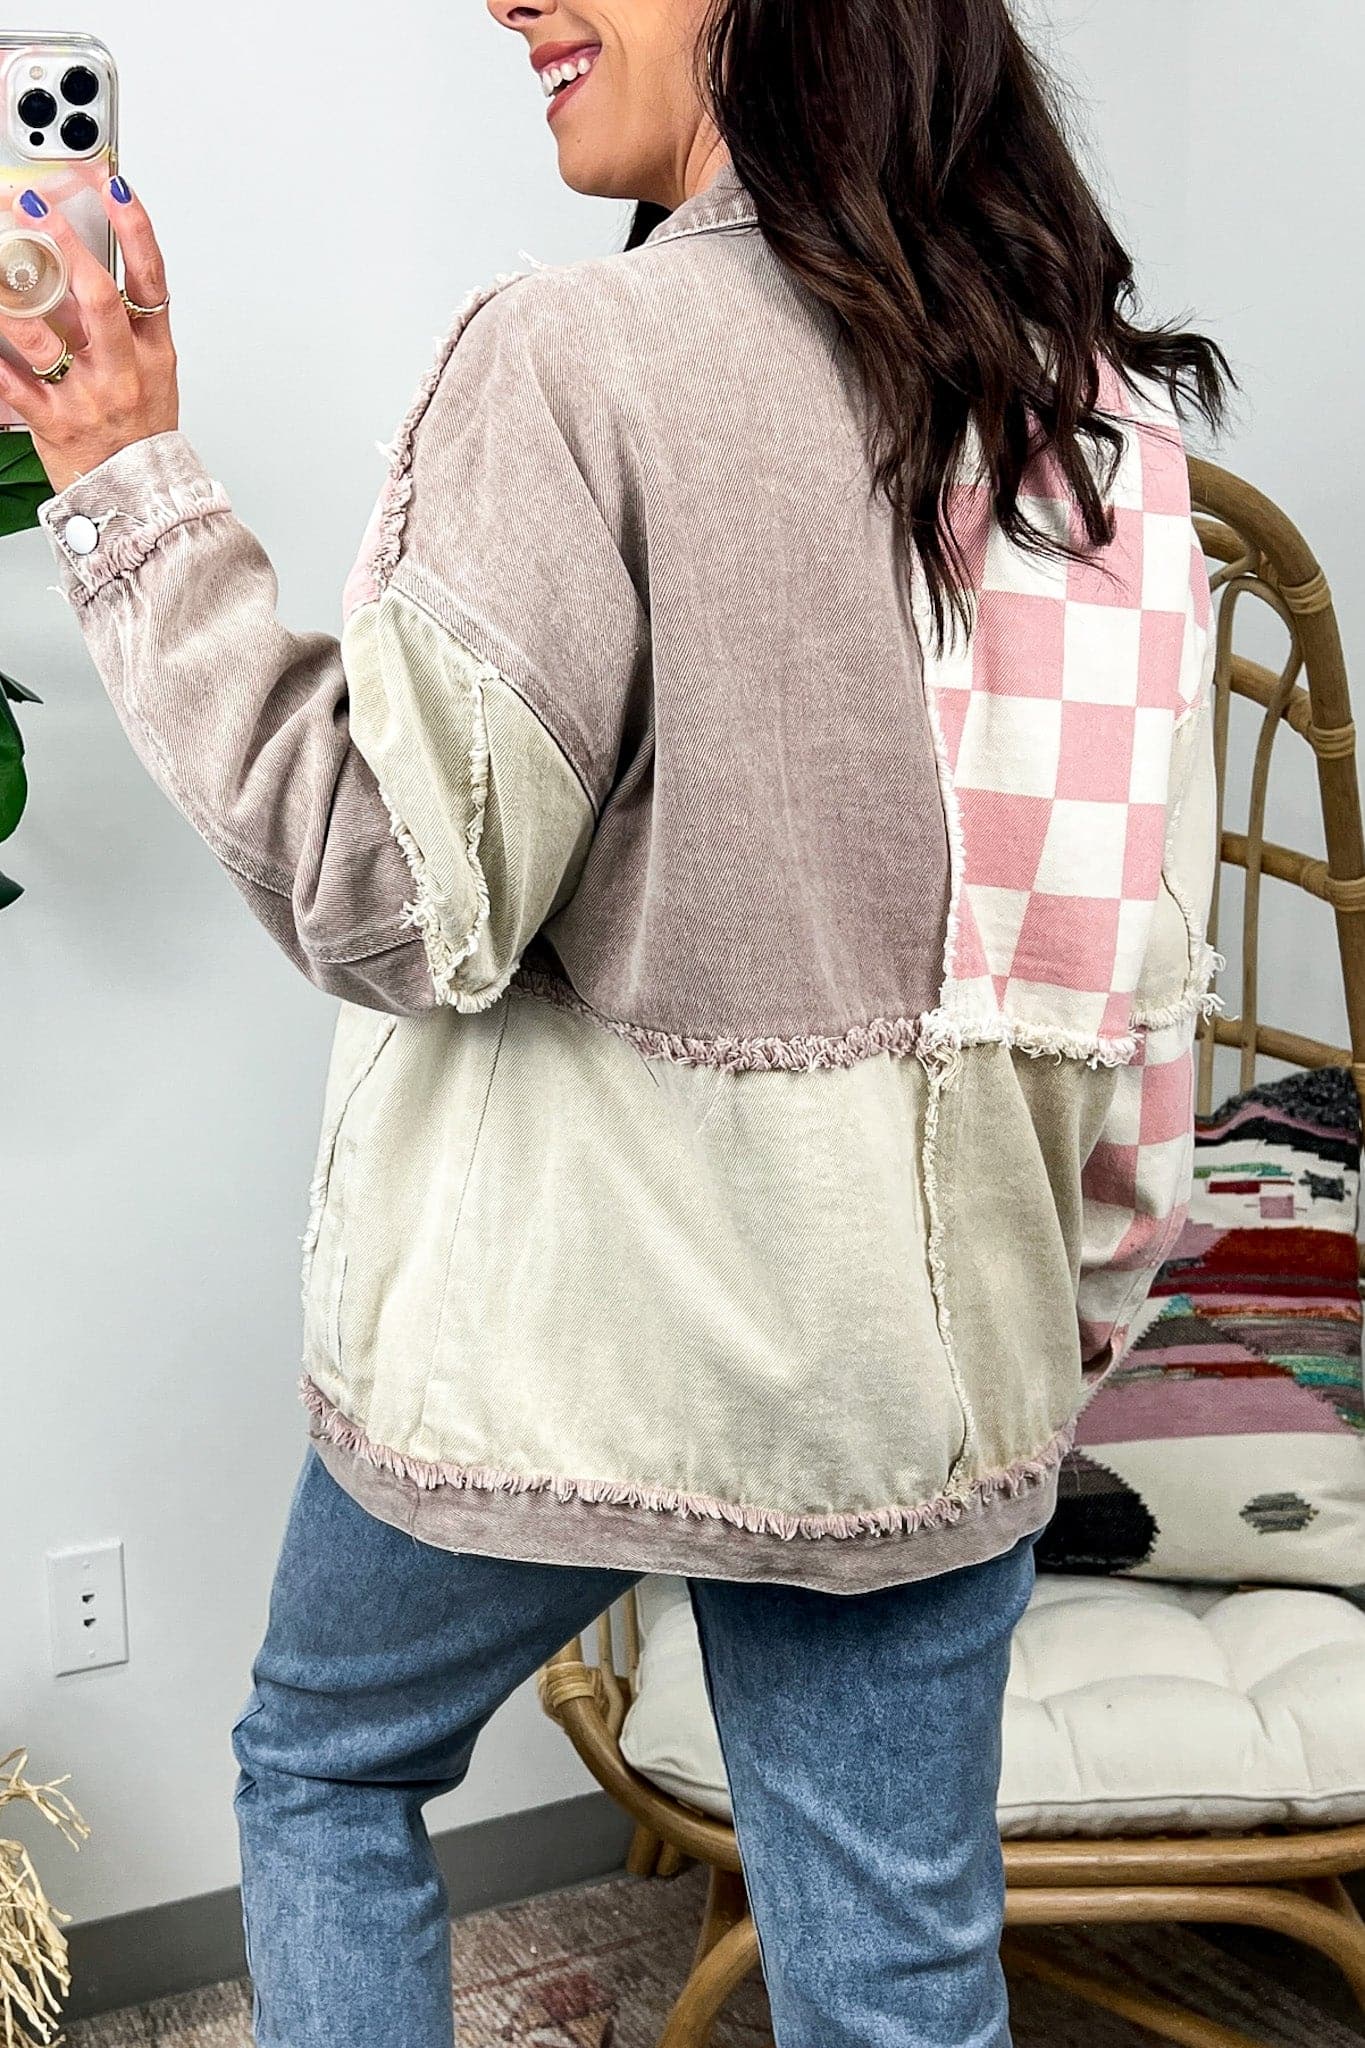  Know the Vibe Checkered Pattern Denim Jacket - BACK IN STOCK - Madison and Mallory